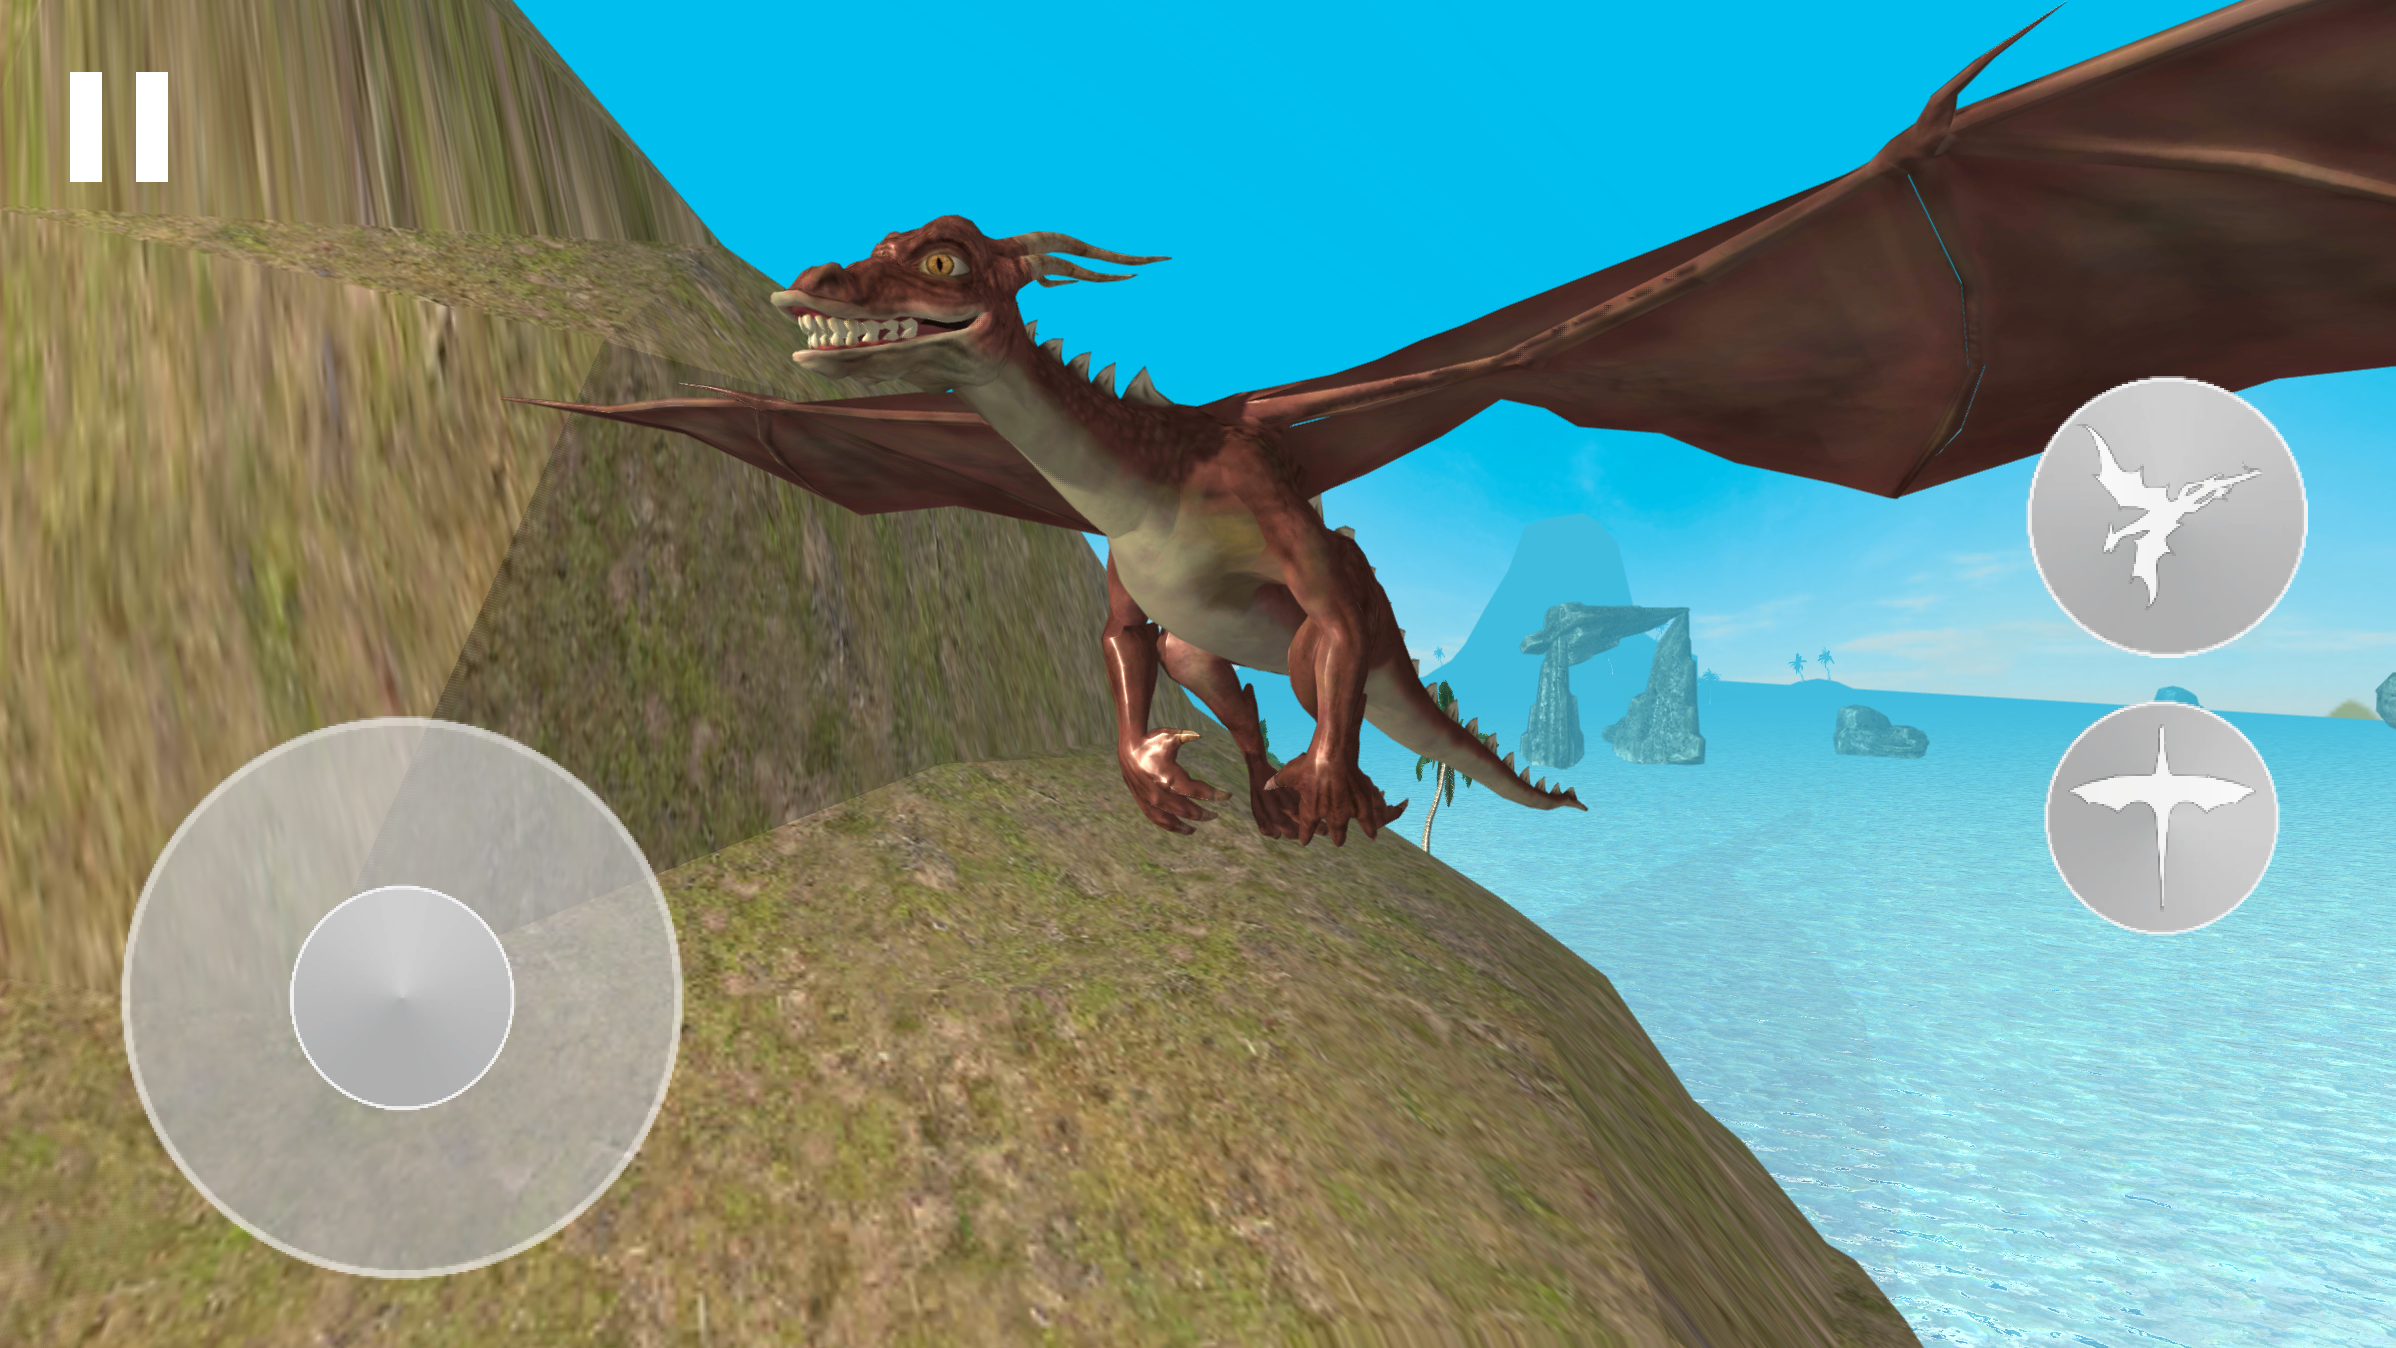 Flying Dragon Race Simulator (humjpgames) APK for Android - Free Download